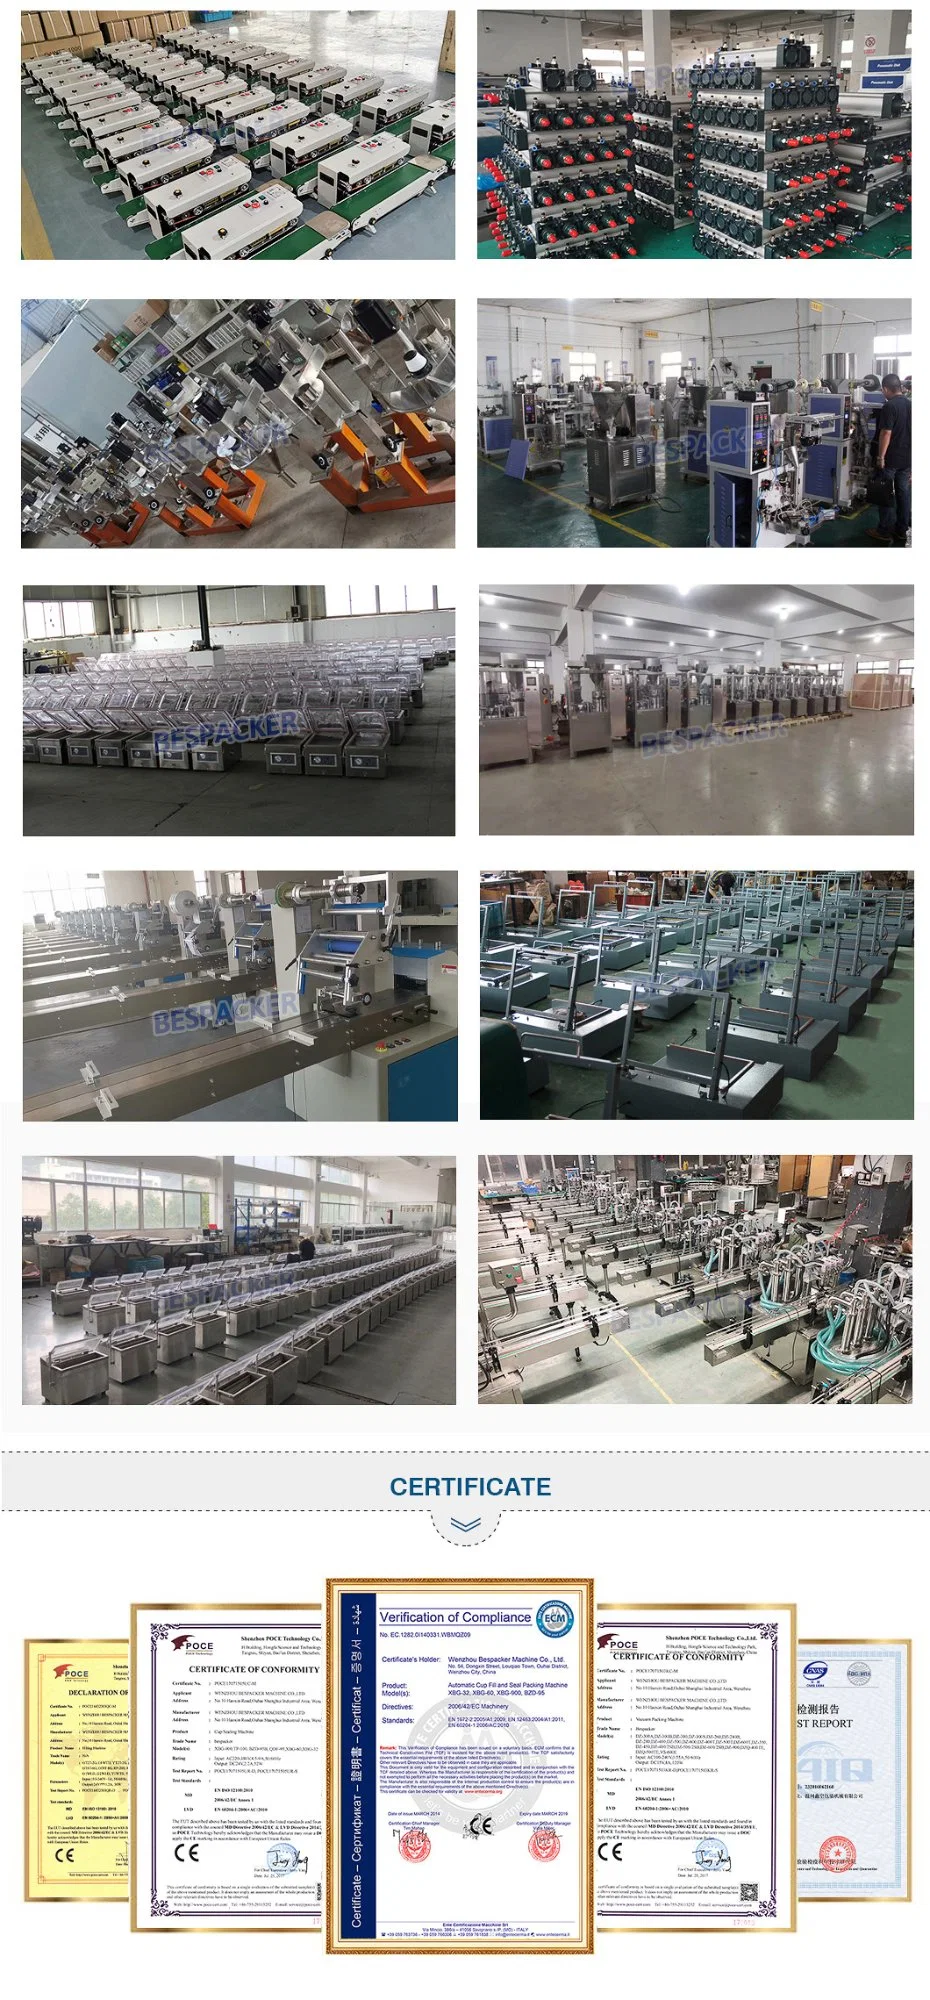 DZ-260C Thermoforming Vacuum &amp; Gas/Nitrogen Filling Packaging/Packing Machine for Food/Meat/Sausage/Juice/Fish